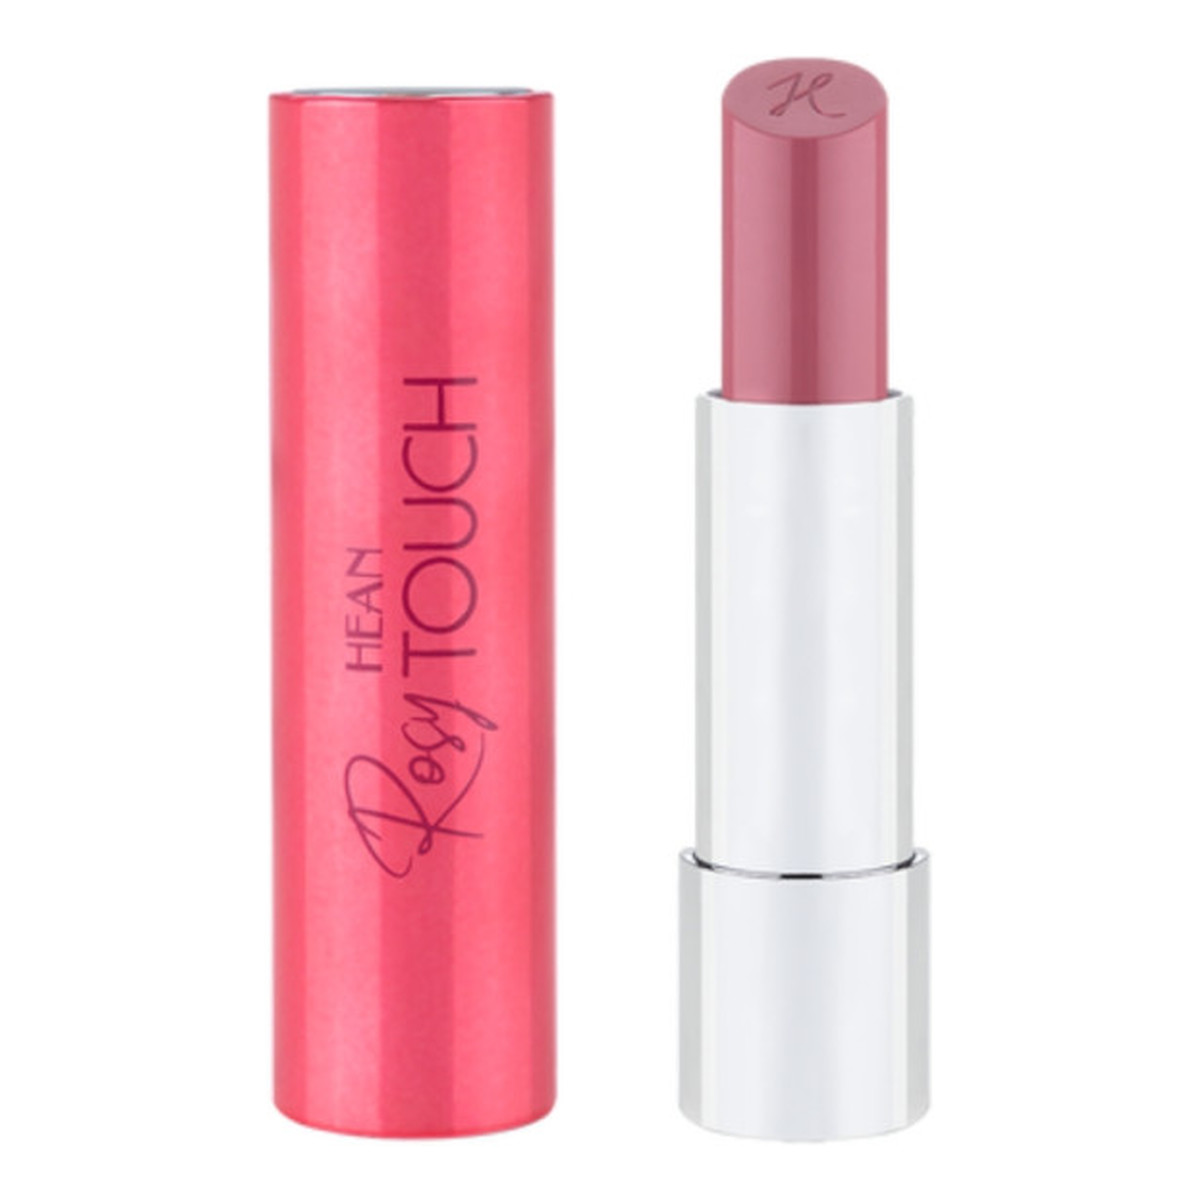 Hean Rosy Touch Tinted Lip Balm Pomadka - balsam do ust 4g